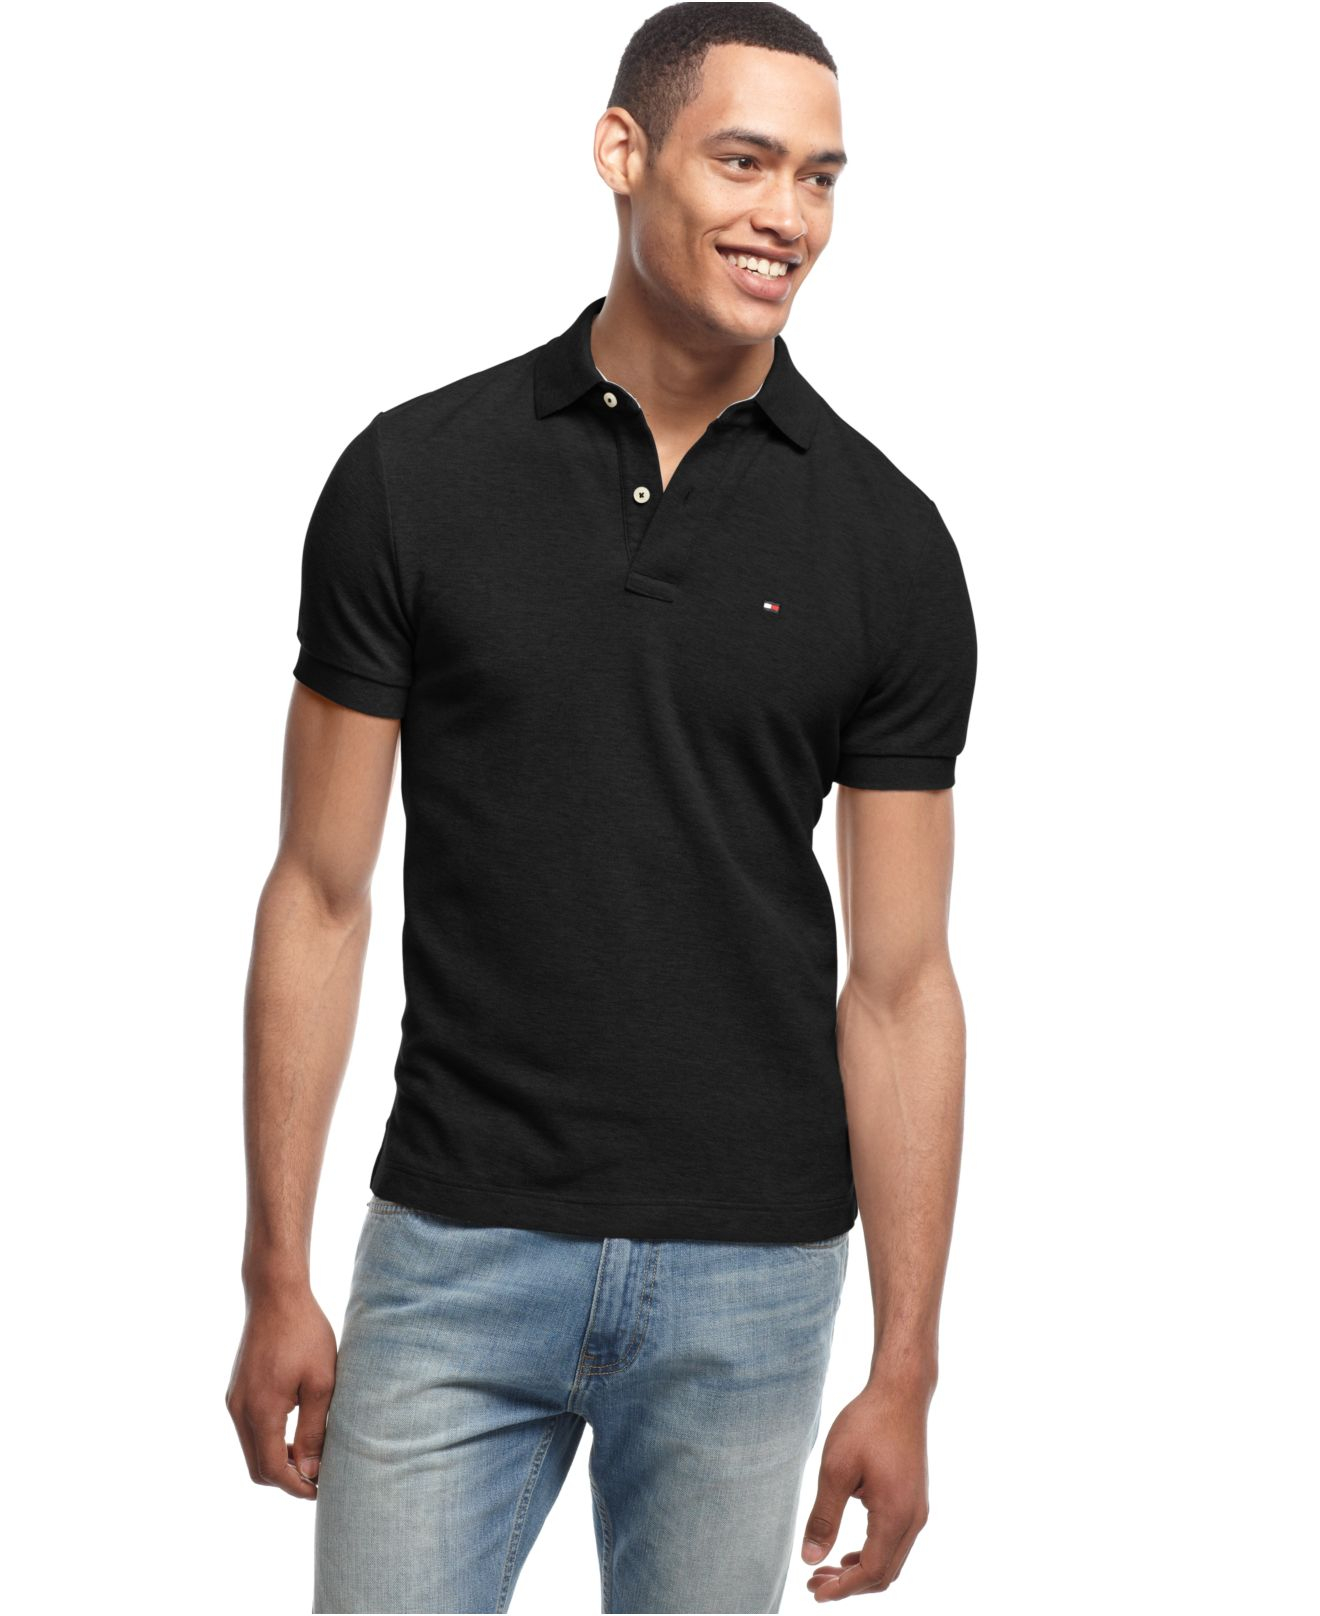 Lyst - Tommy Hilfiger Custom Fit Ivy Polo in Black for Men